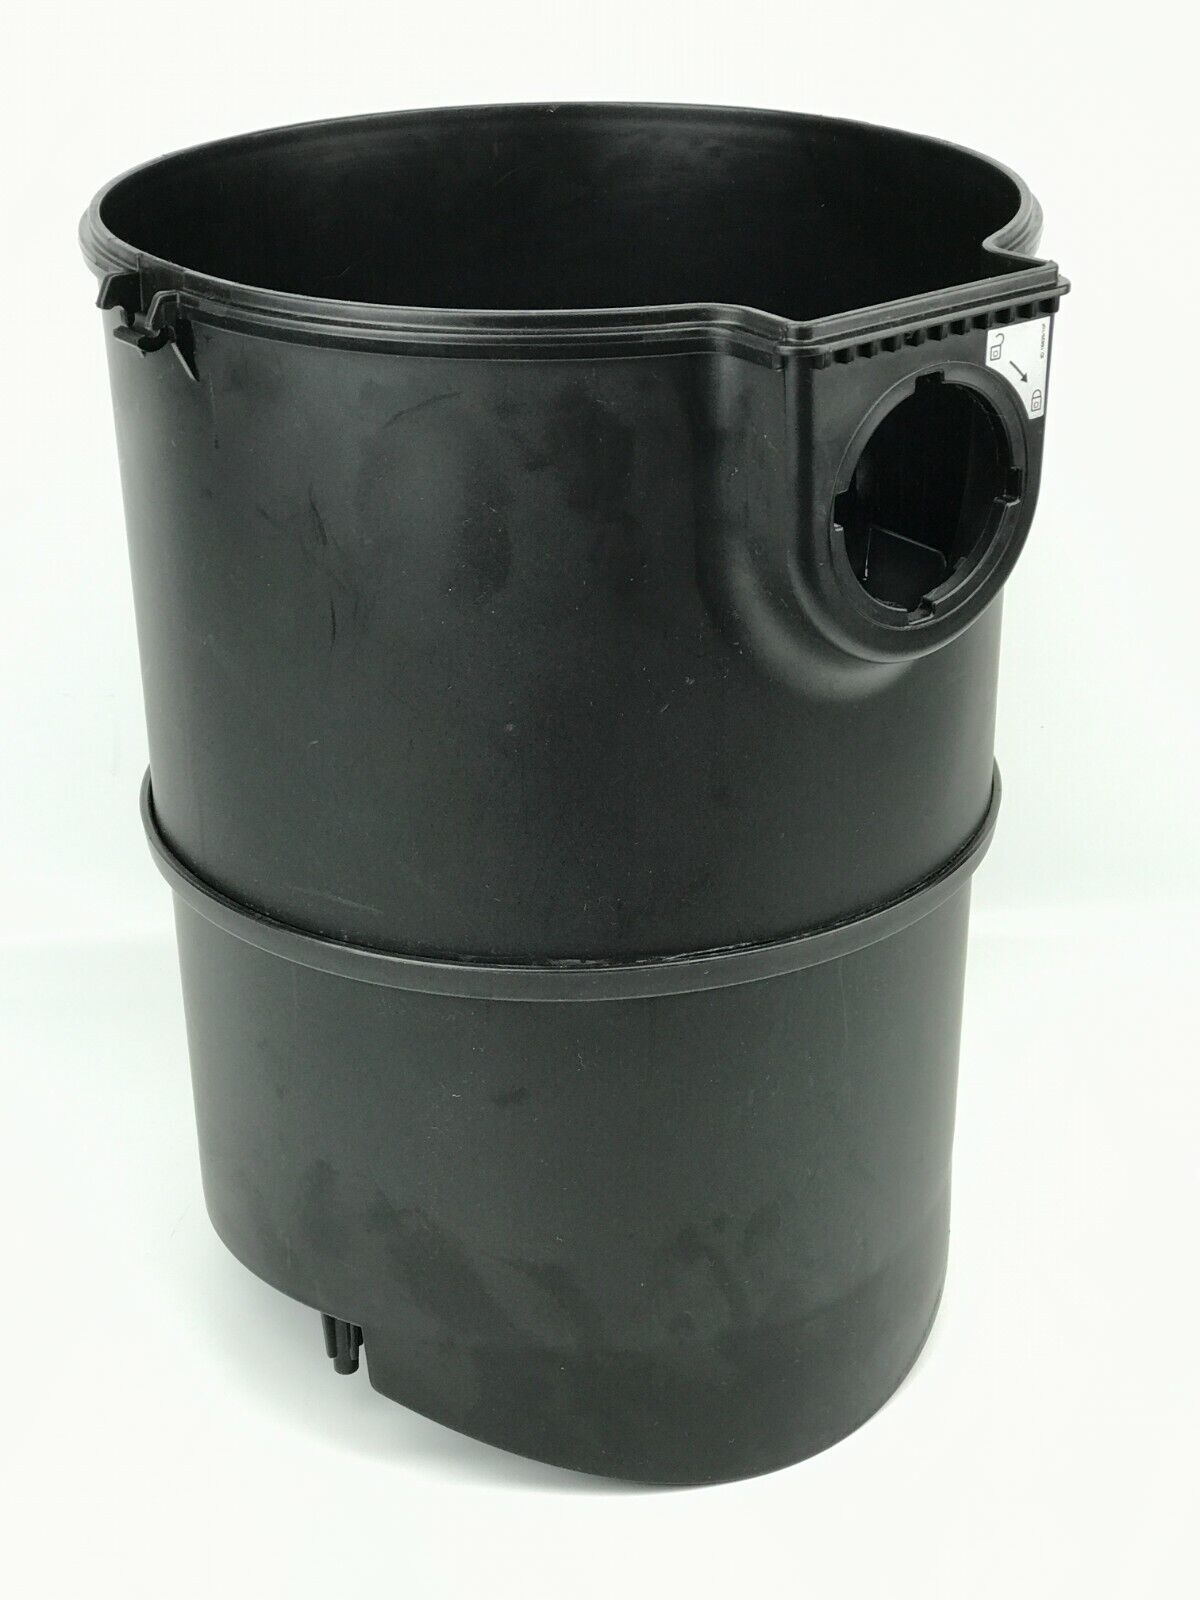 Oase Pondovac 4 Replacement Tank Assembly